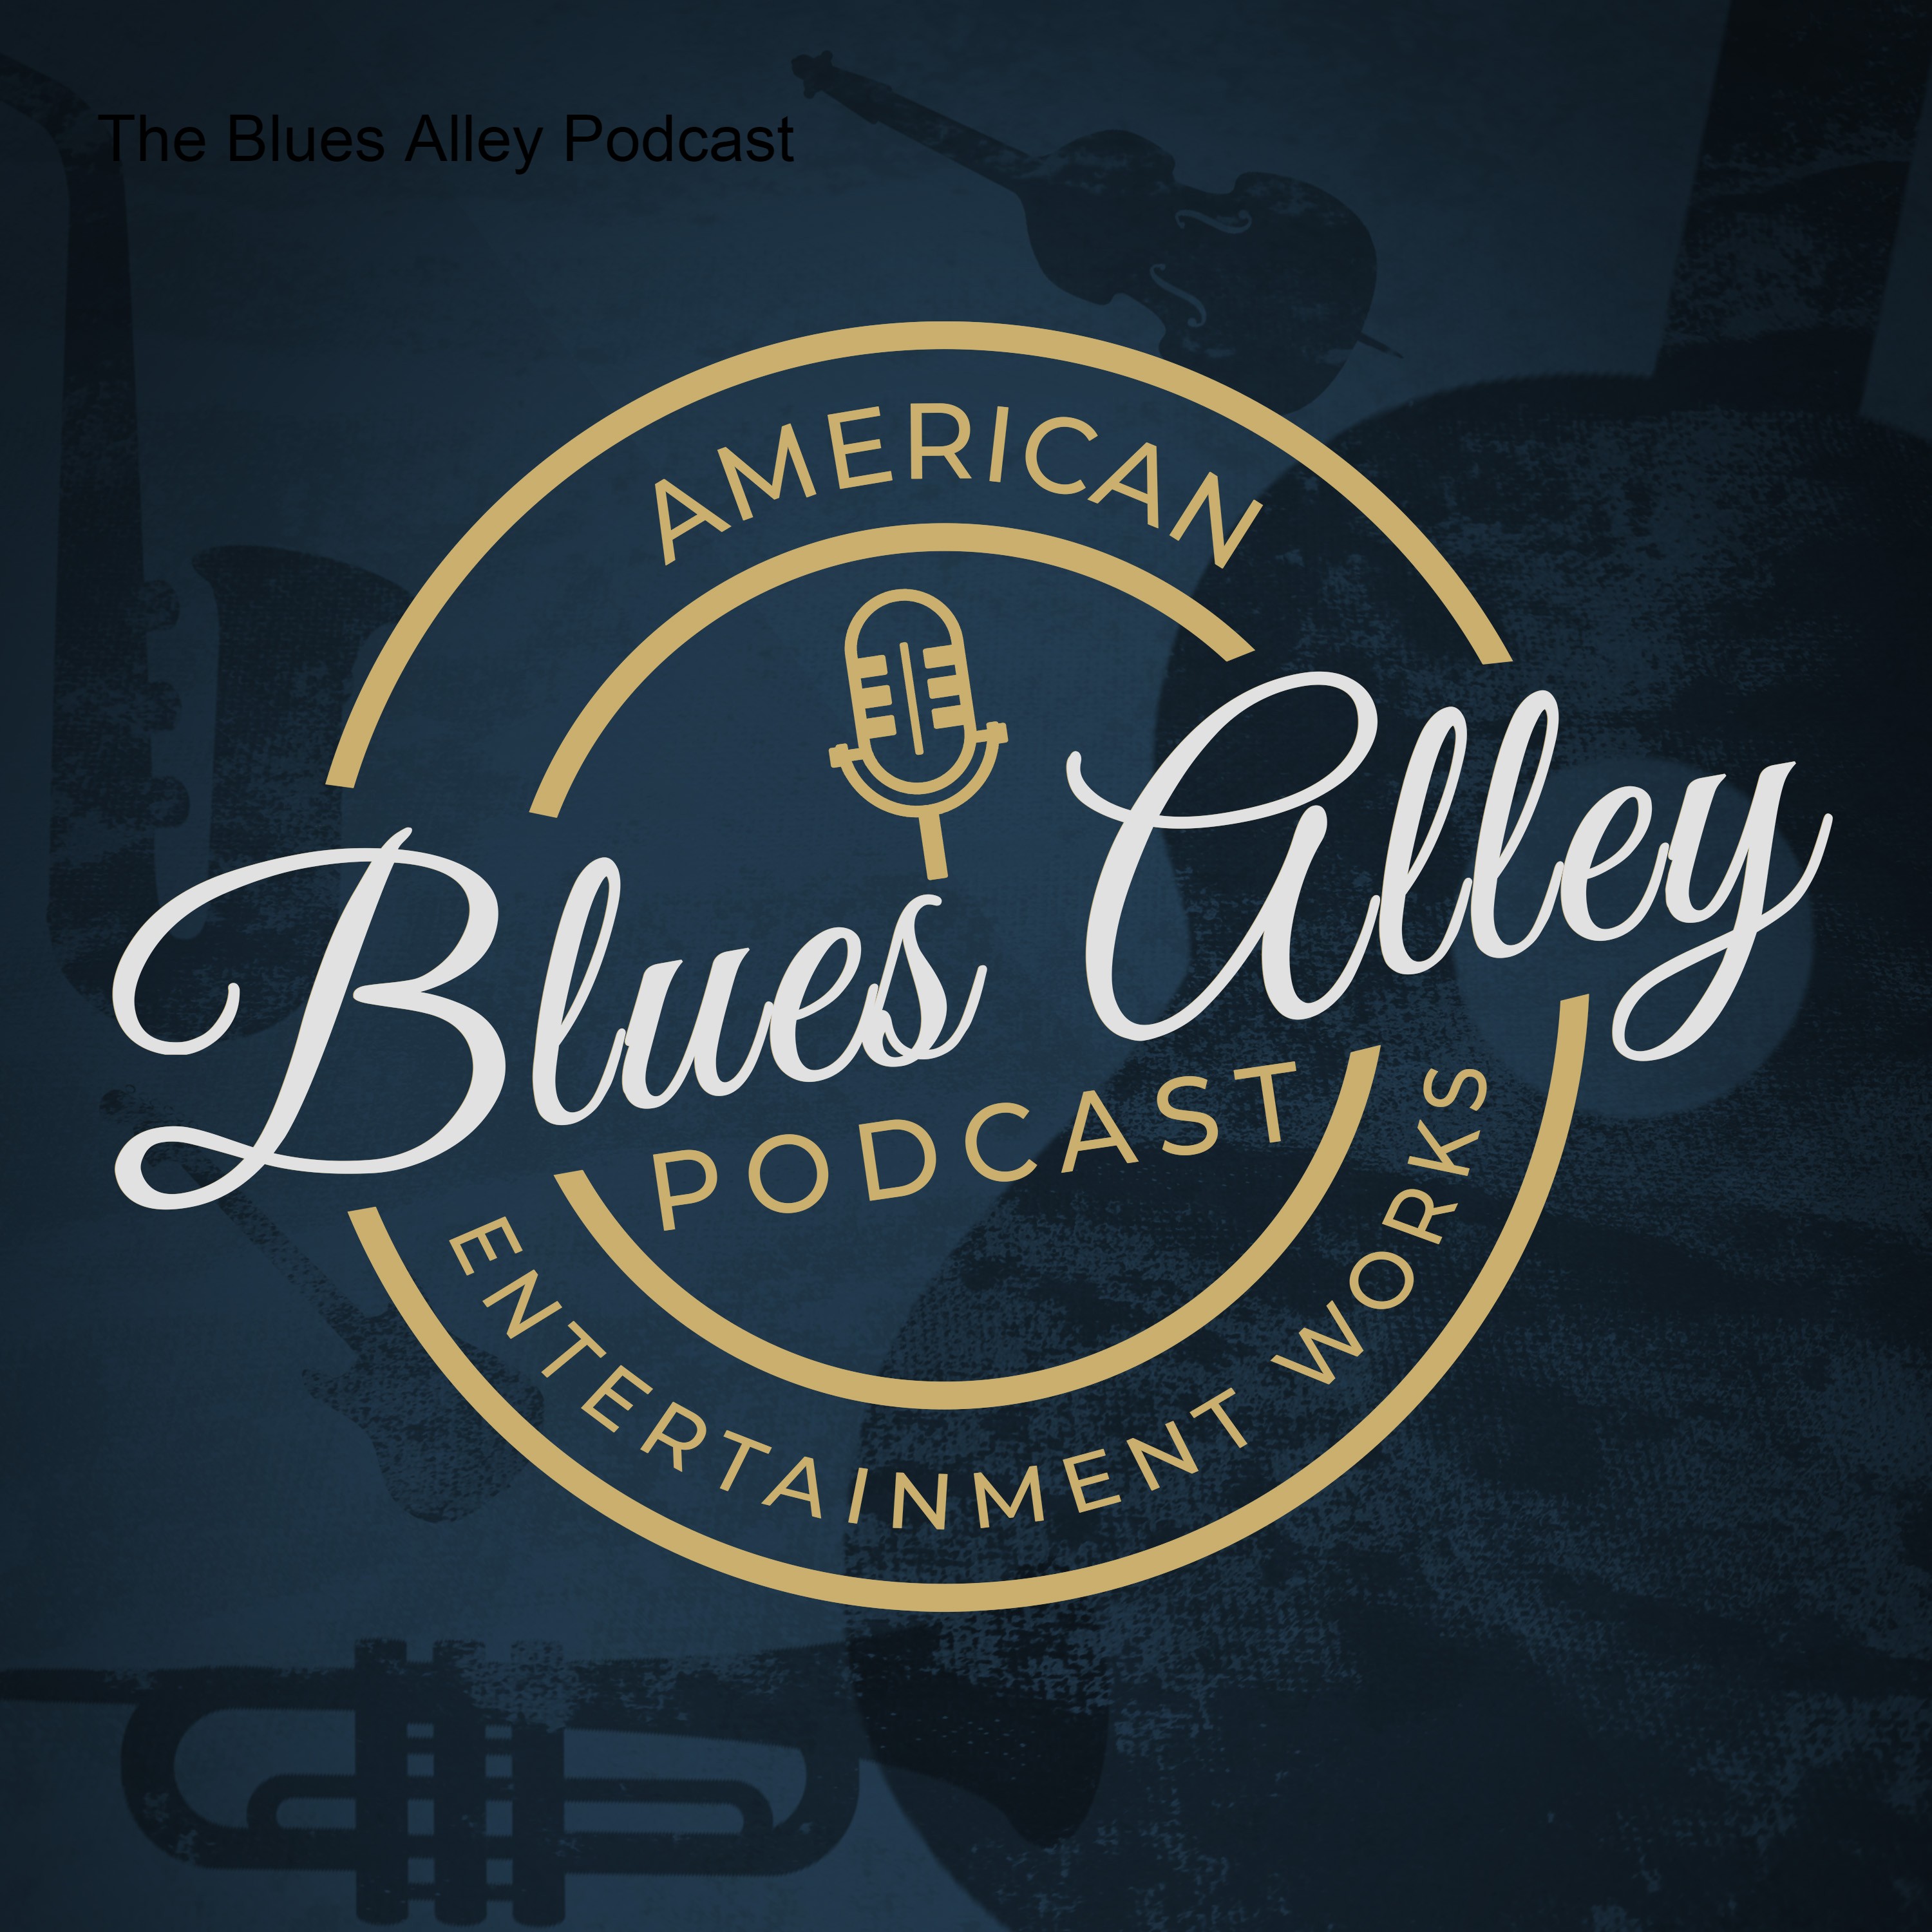 The Blues Alley Podcast